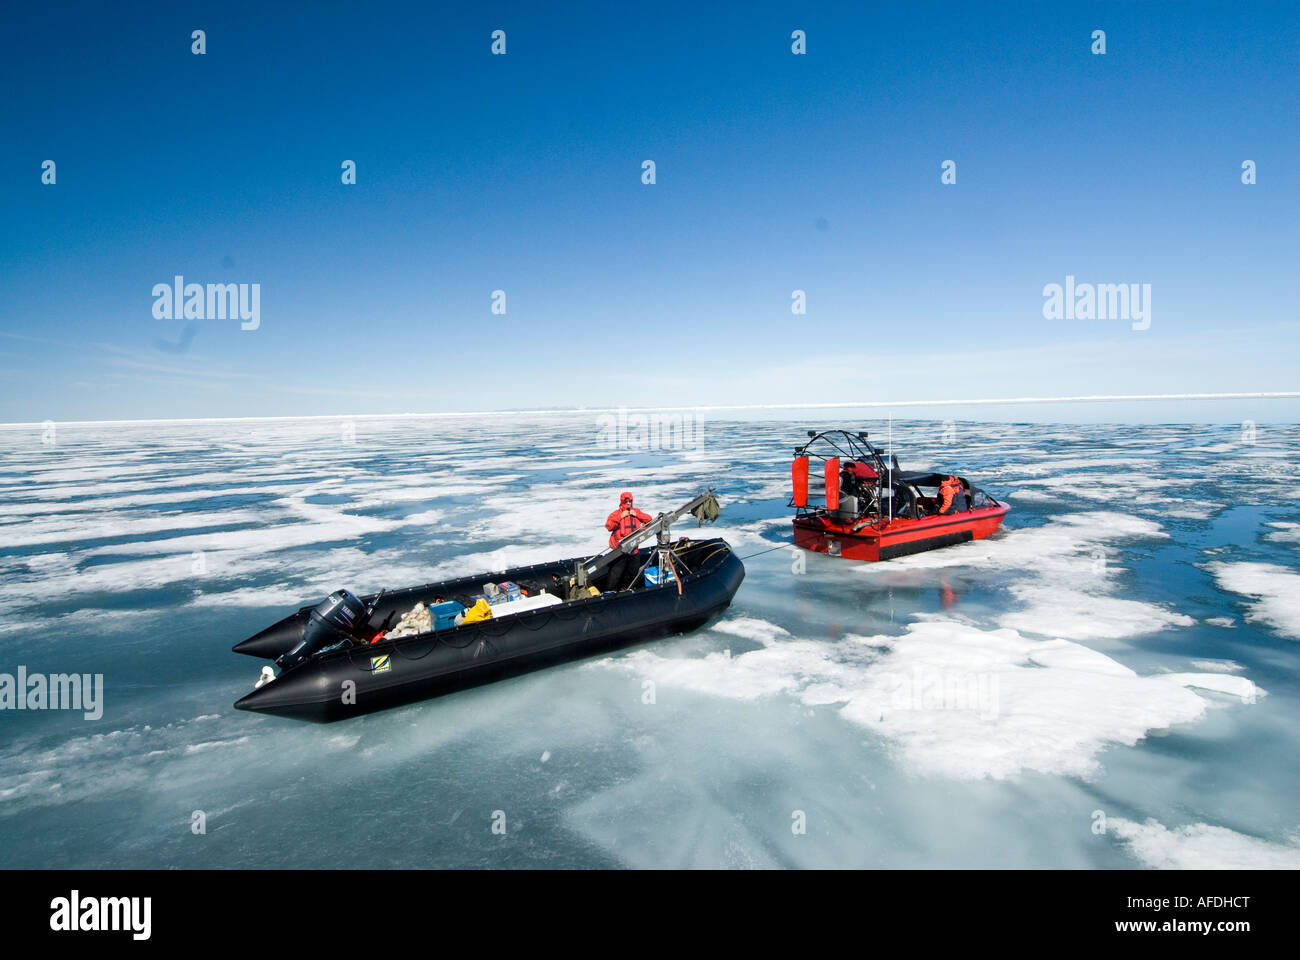 Air boats in use in the high Arctic for transporting freight and search and rescue operations The airboats Stock Photo